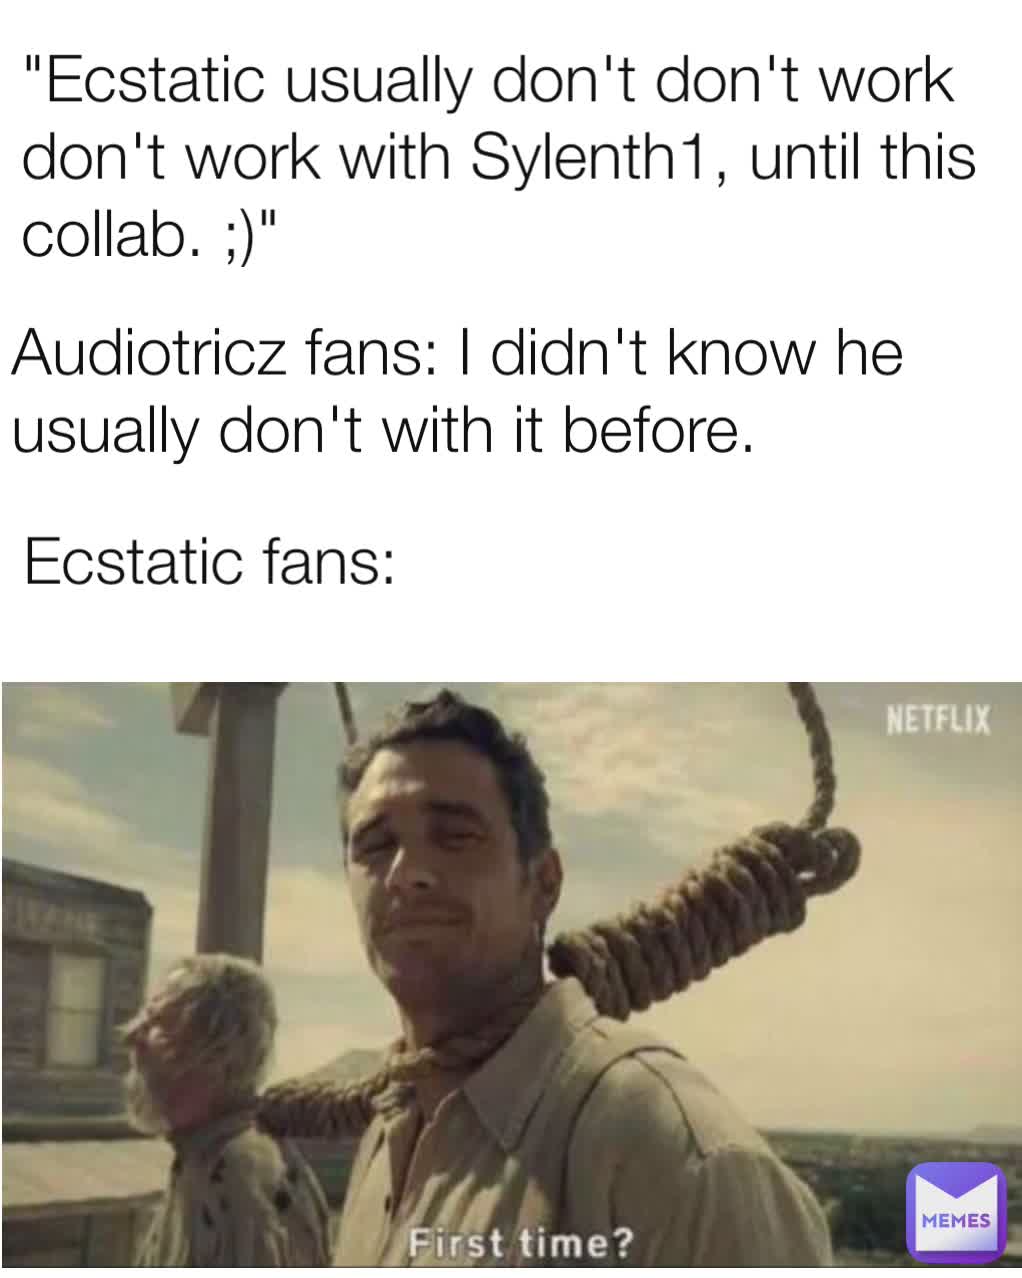 Audiotricz fans: I didn't know he usually don't with it before. Ecstatic fans: "Ecstatic usually don't don't work don't work with Sylenth1, until this collab. ;)"